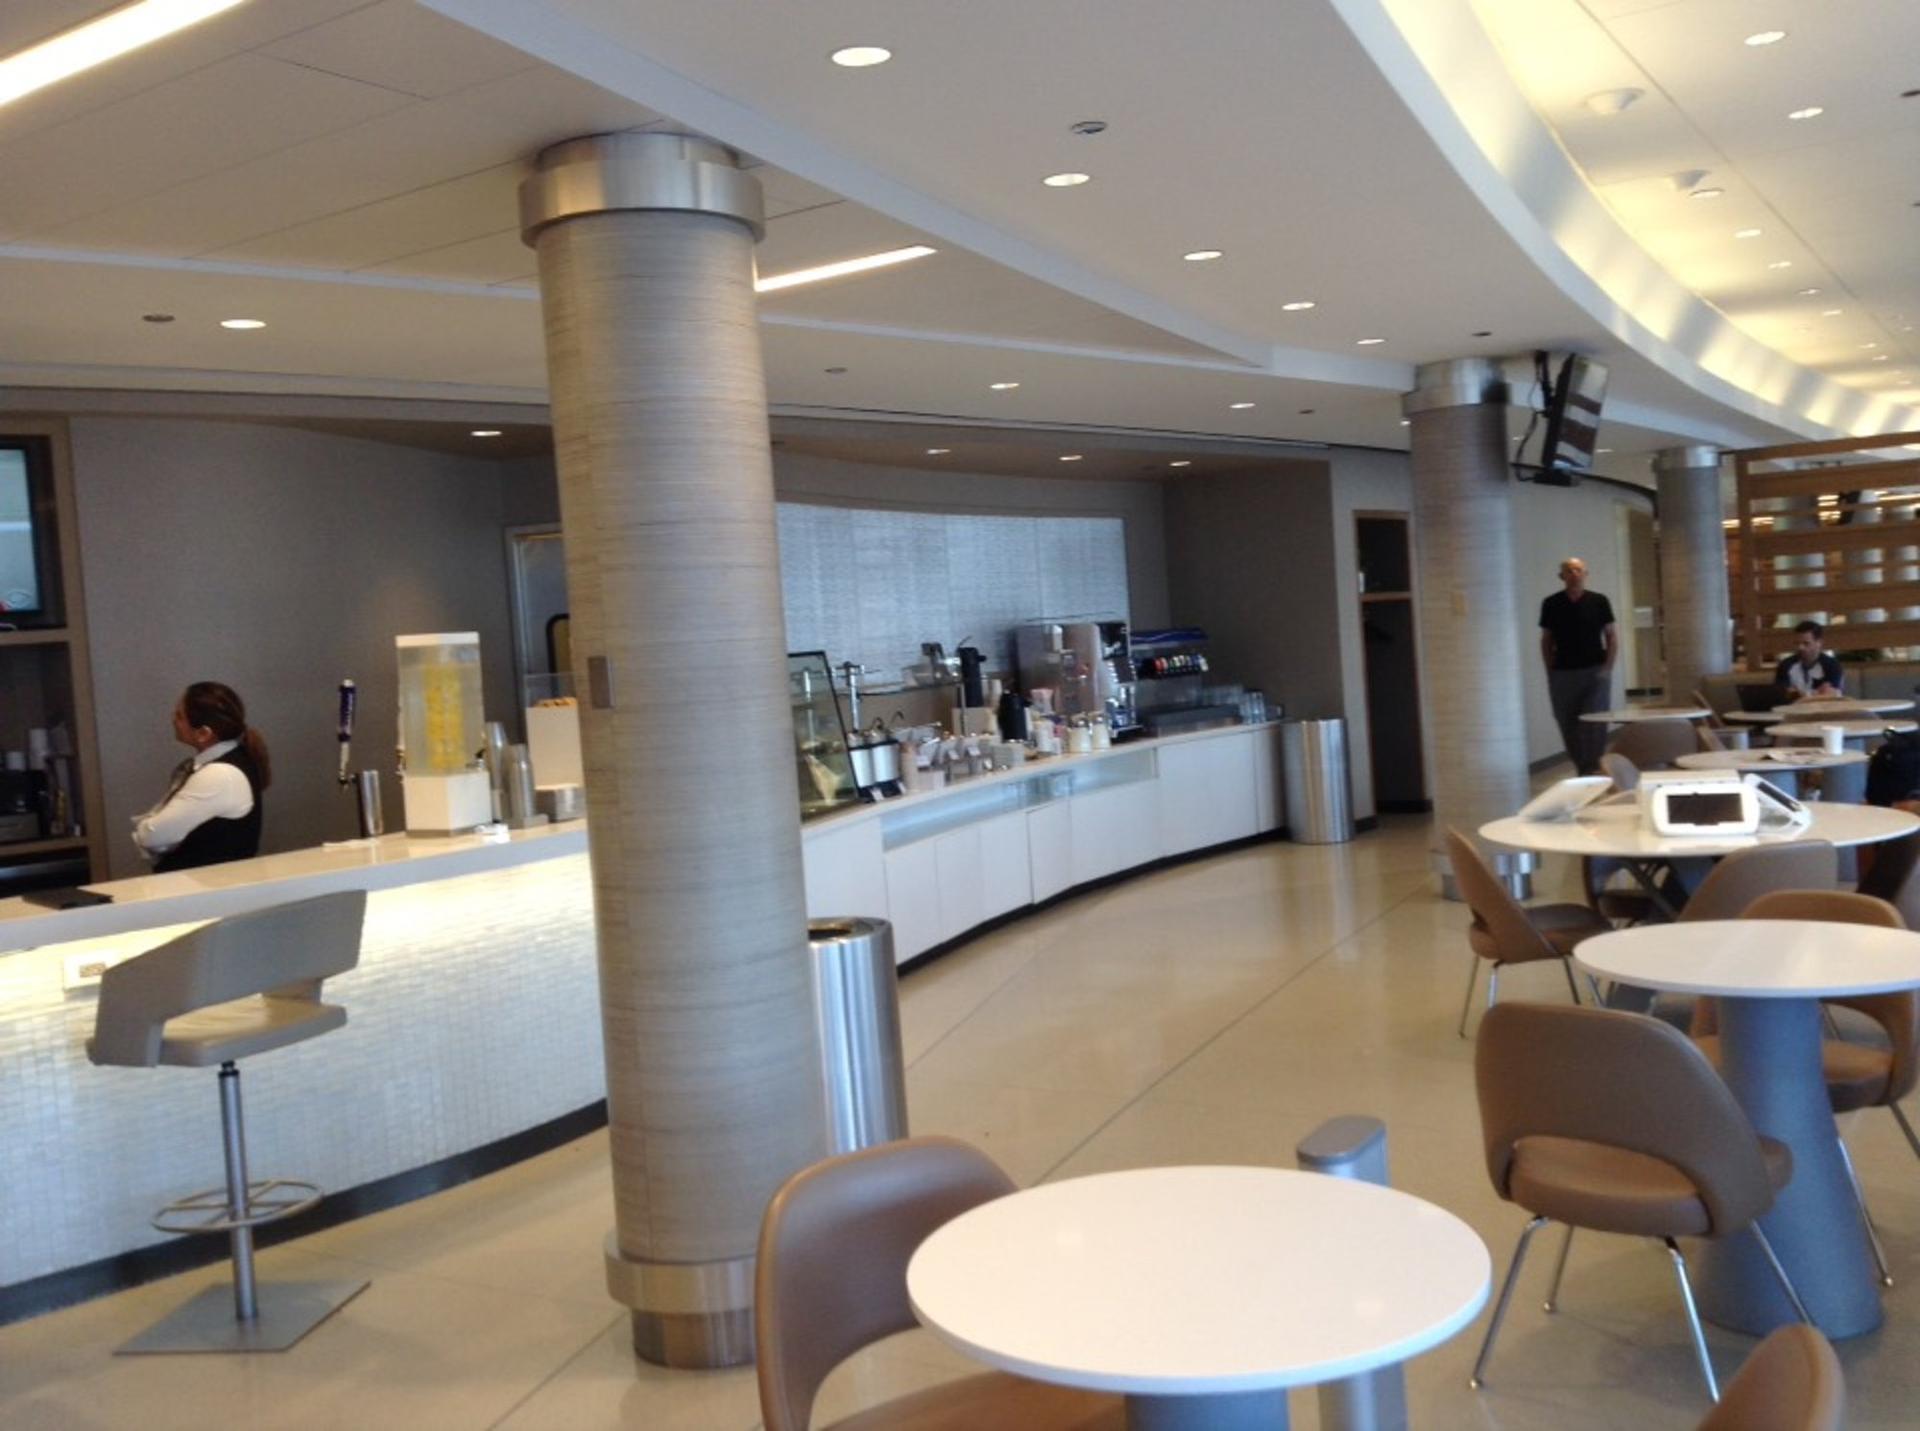 American Airlines Admirals Club image 43 of 50